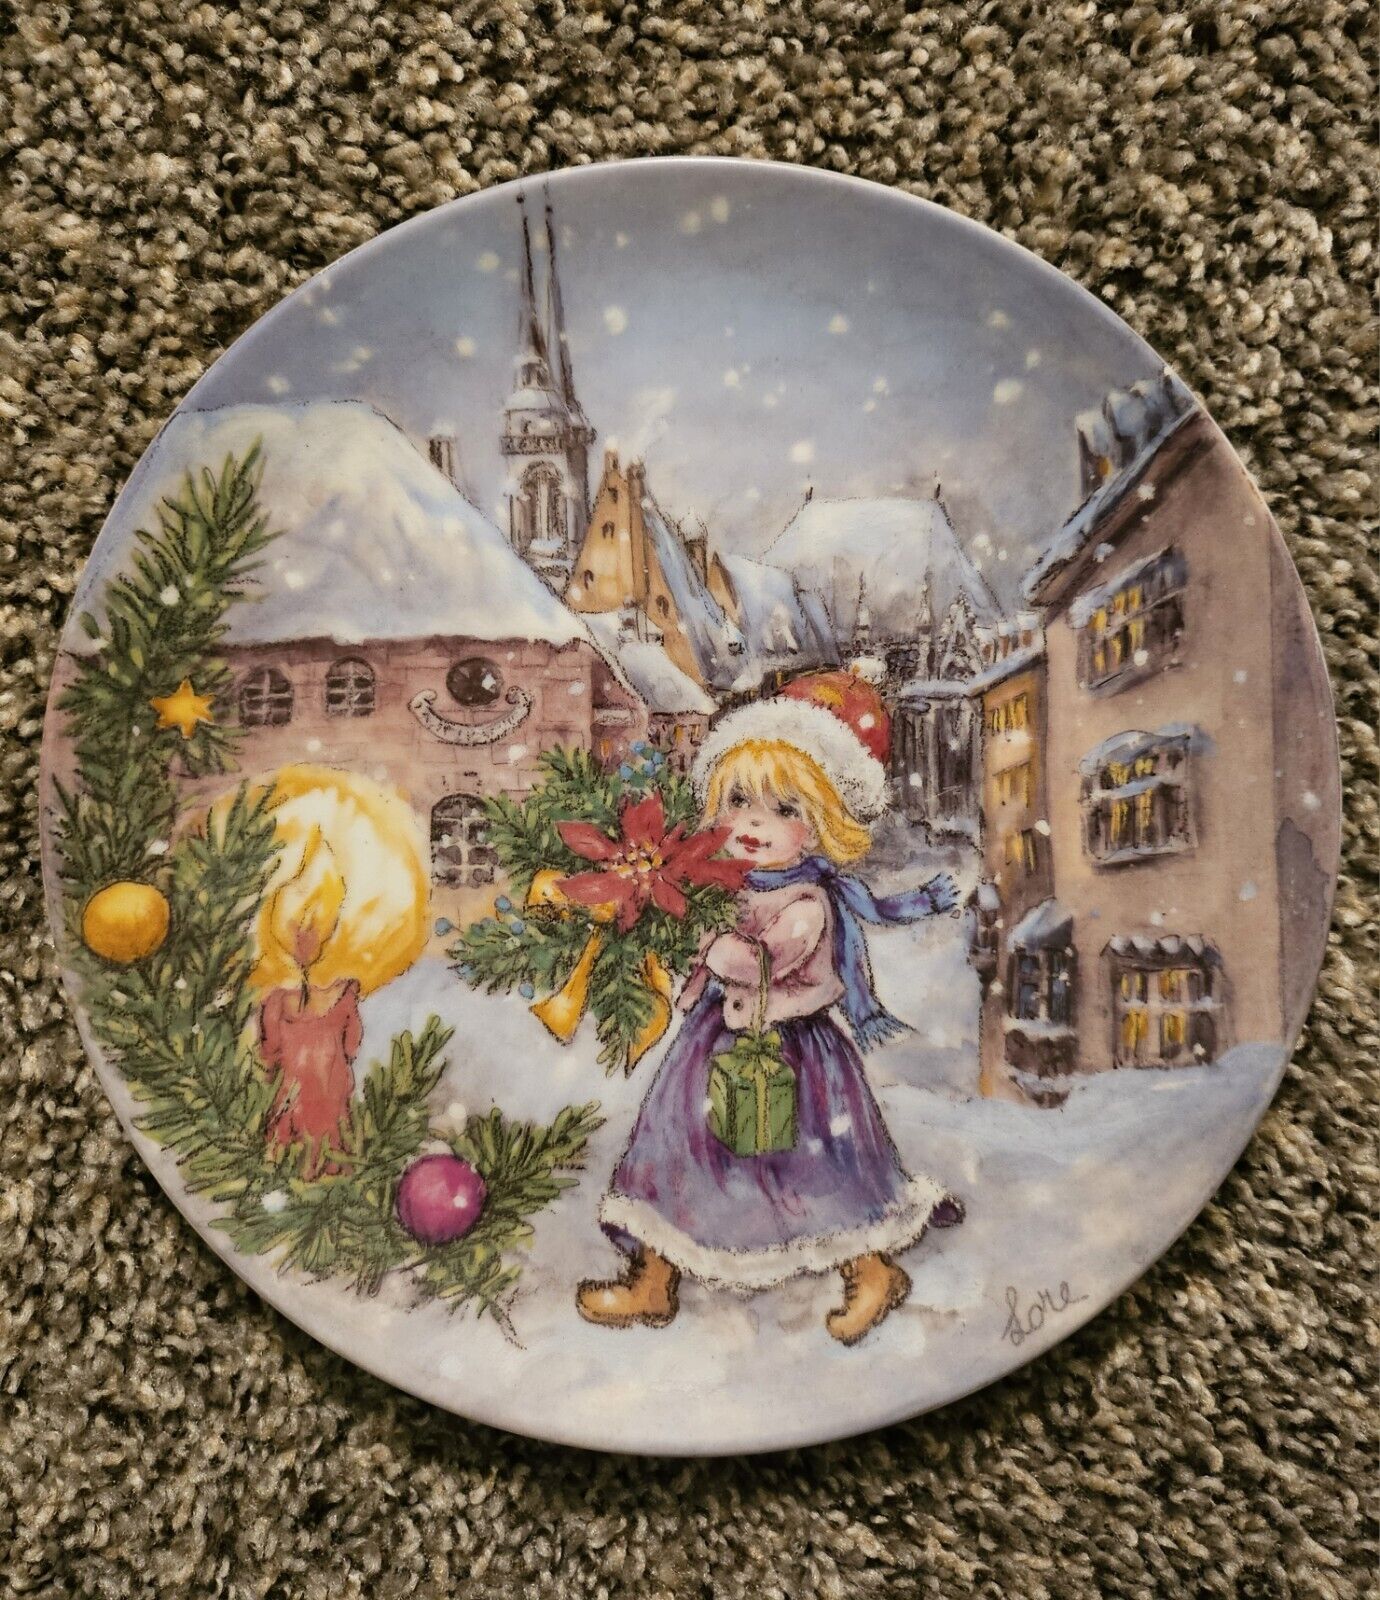 Goebel 1982 First edition “A Gift Of Joy” Numbered Plate # 1274 Germany Vintage 